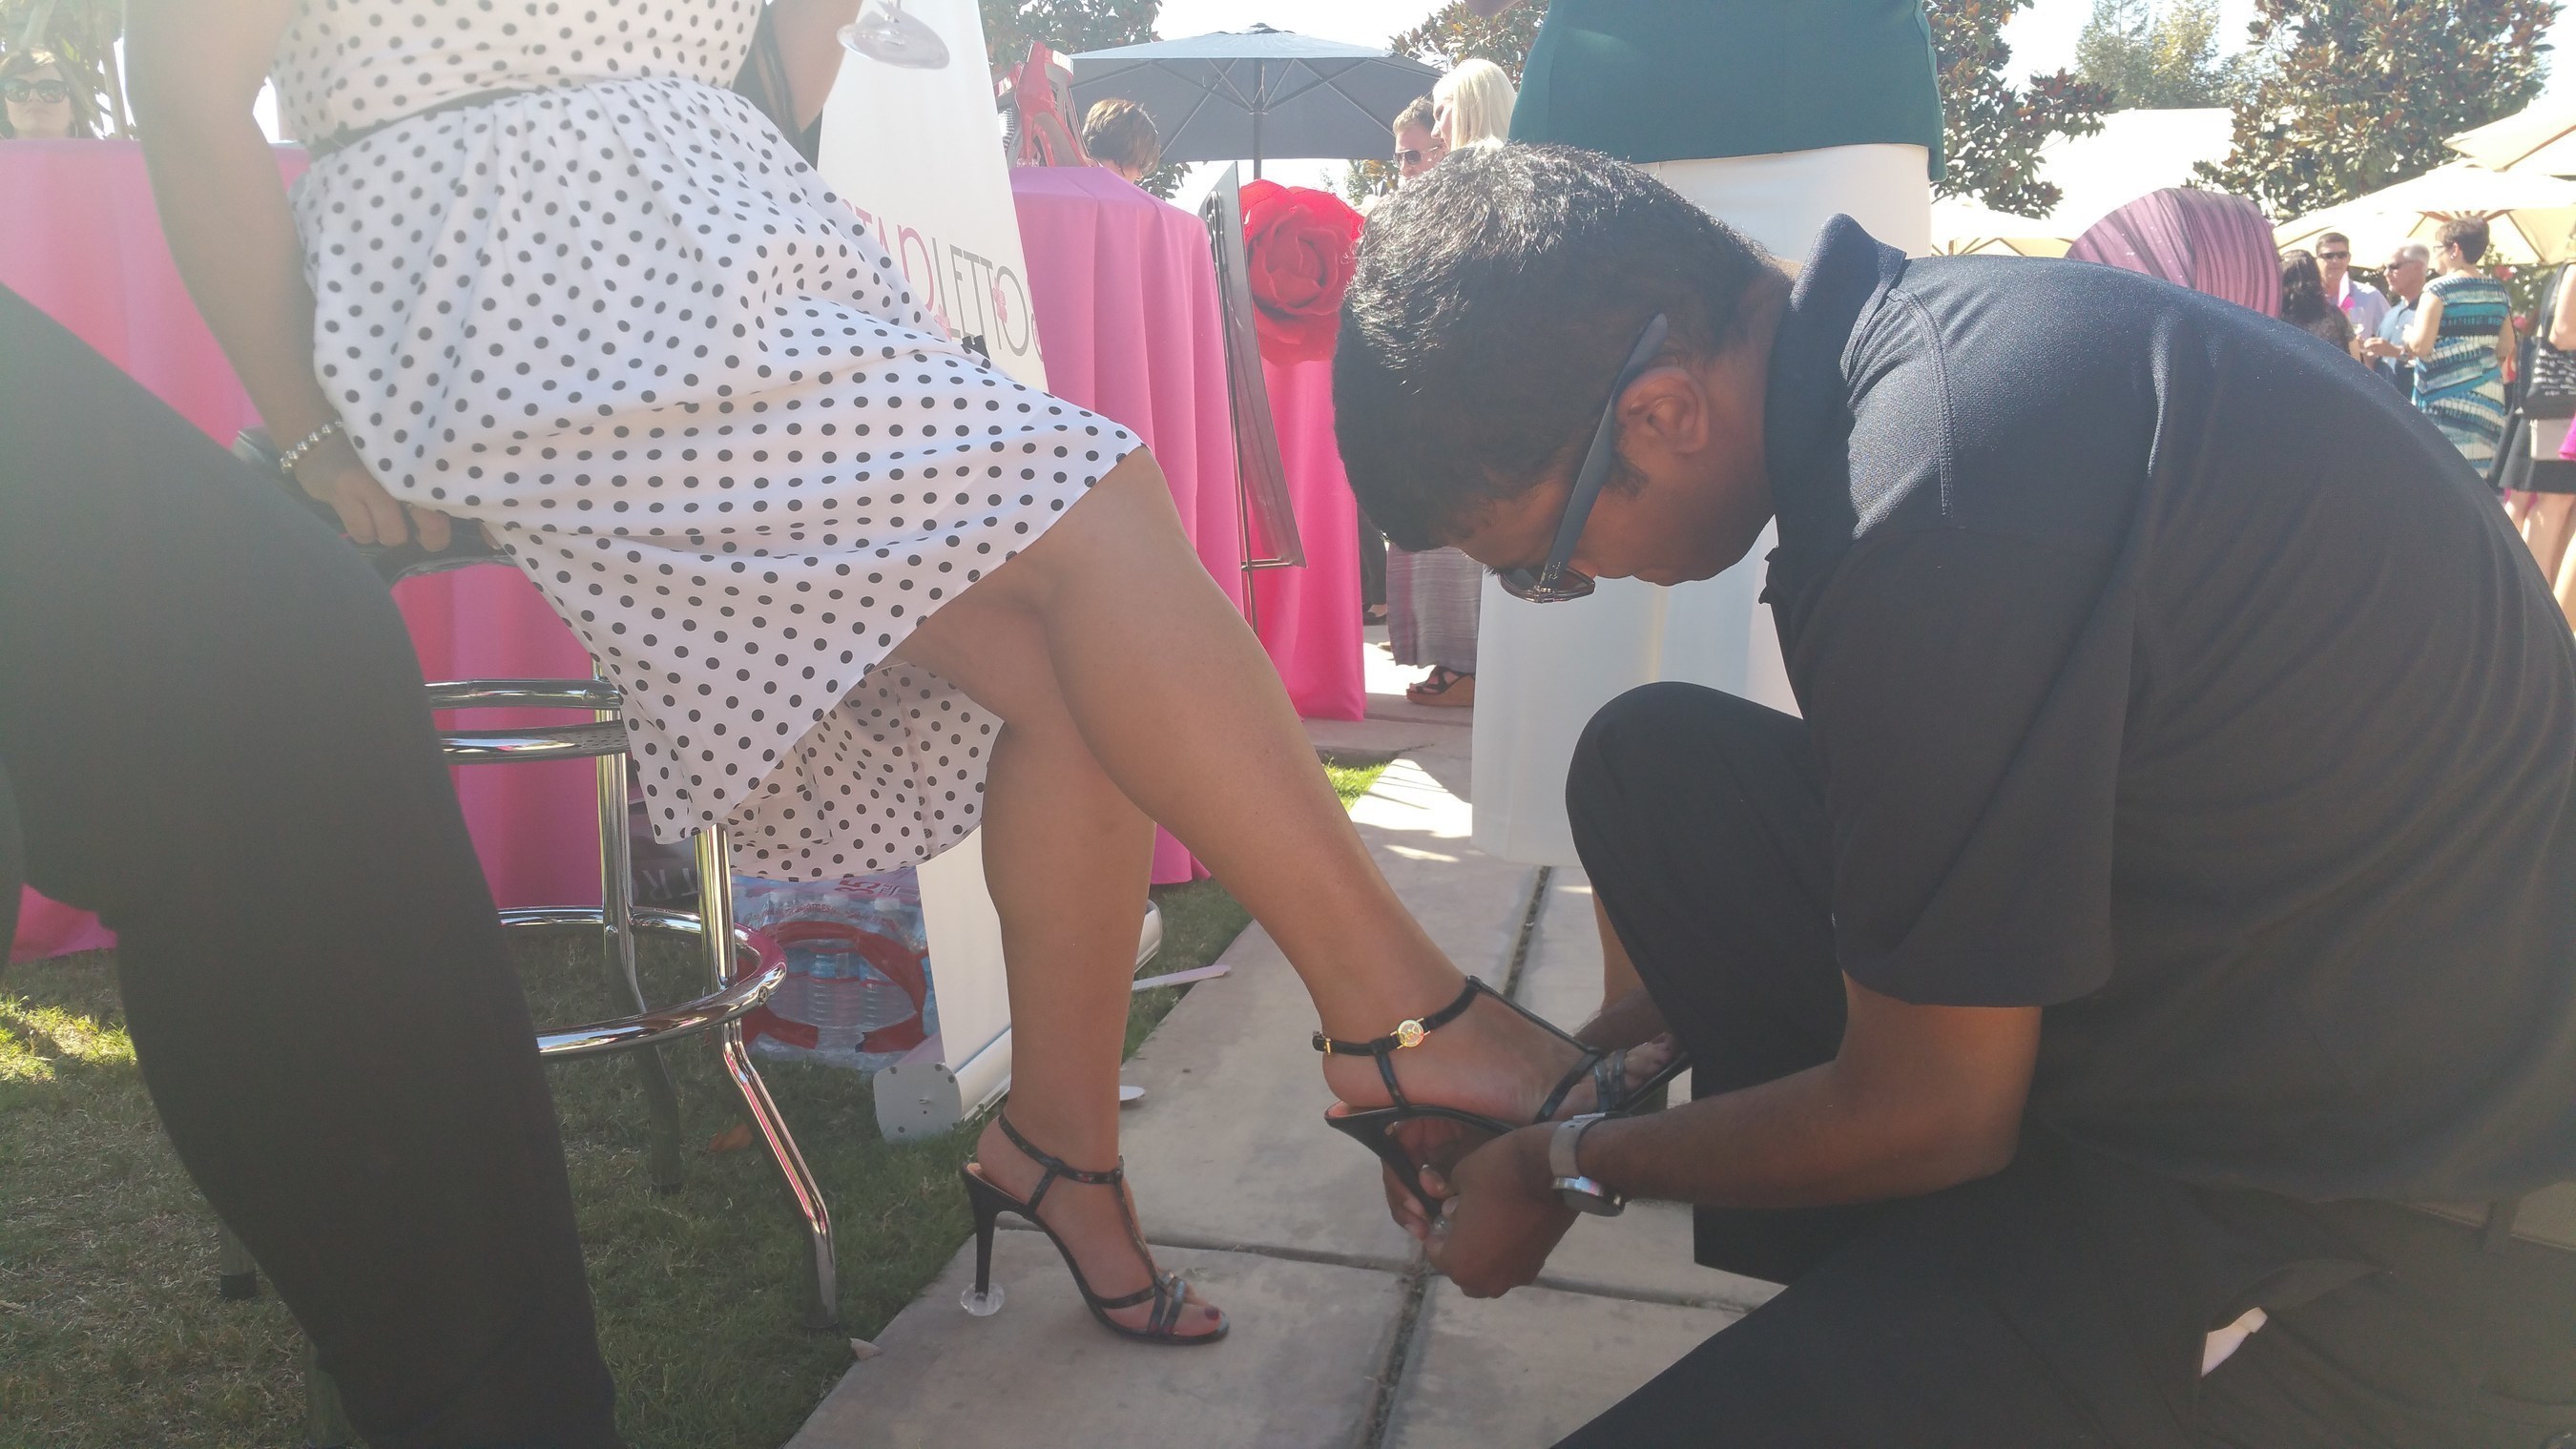 Starlettos lends HEEL Support at Wine , Women & Shoes Event to benefit "CASA" Of KERN County https://instagram.com/Starlettosstyle/